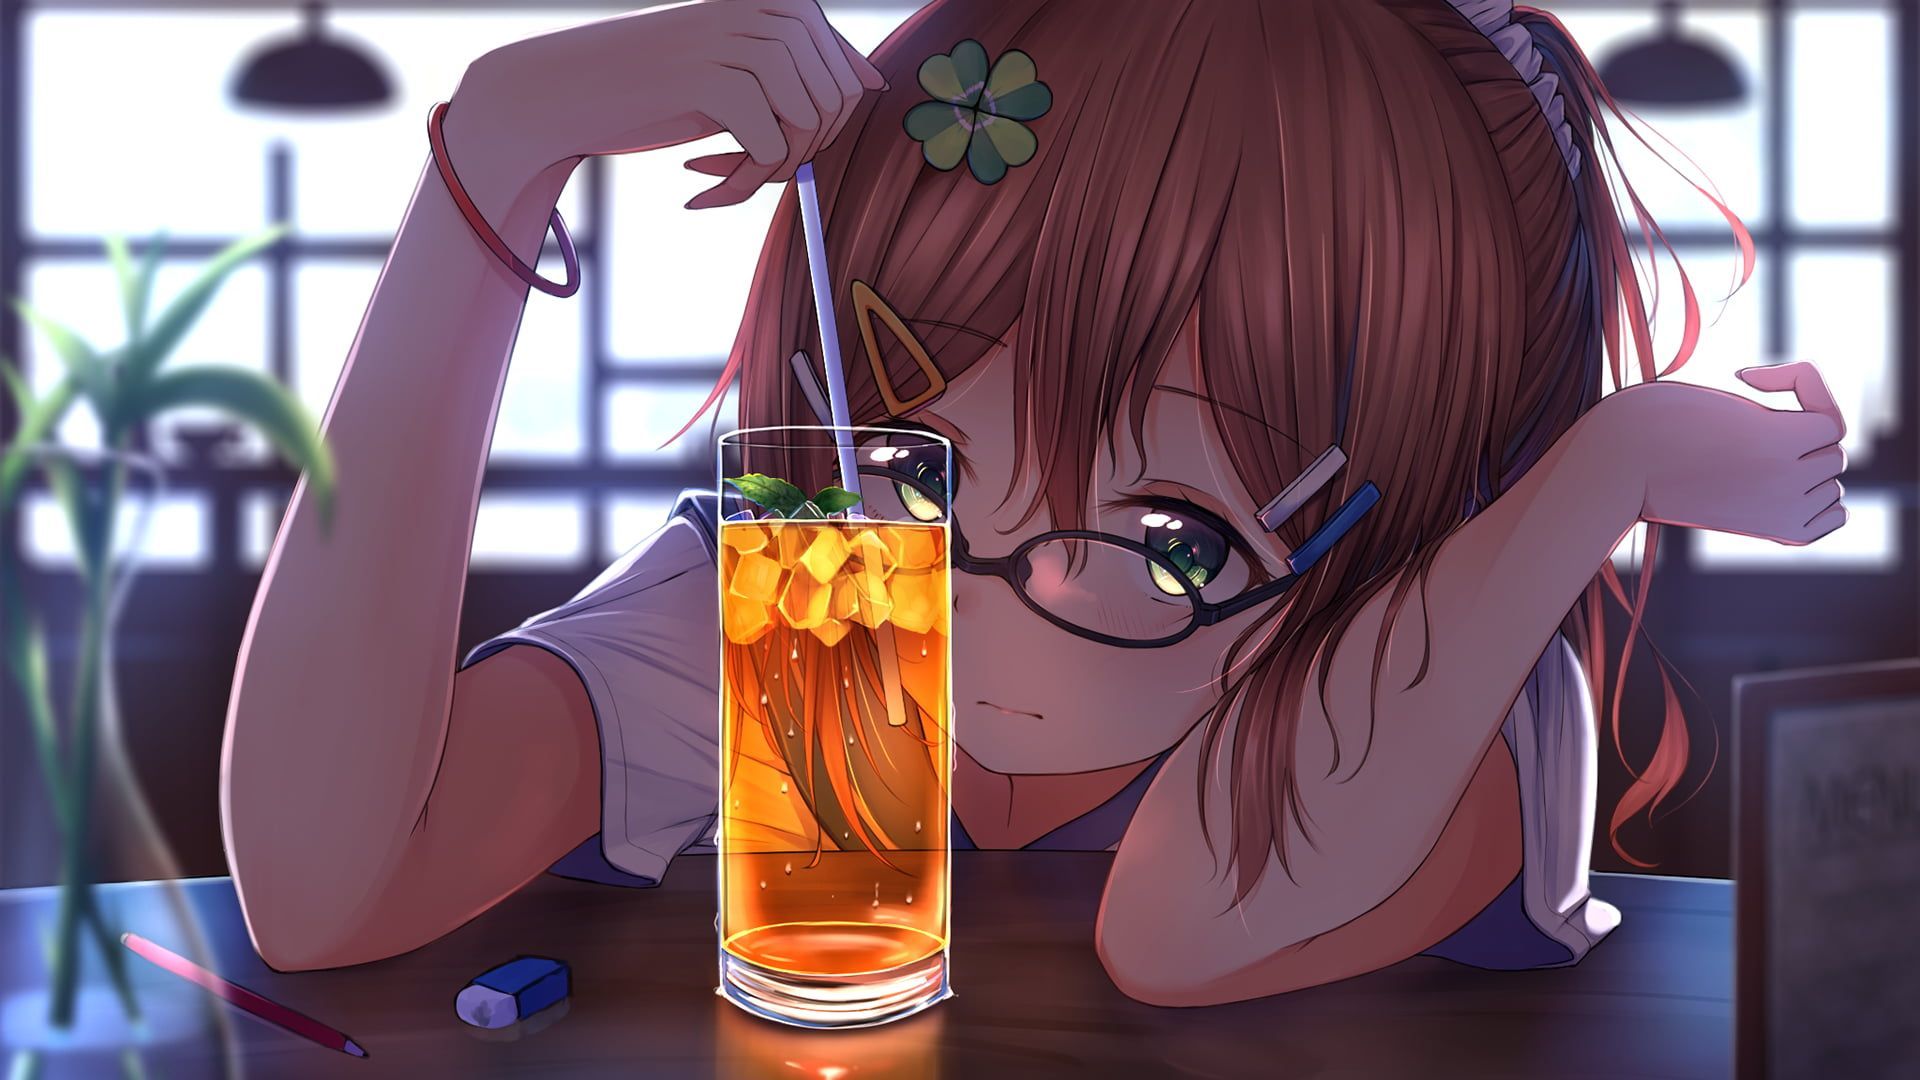 1125586 anime Love Live drink sad alcoholic beverage  Rare Gallery HD  Wallpapers